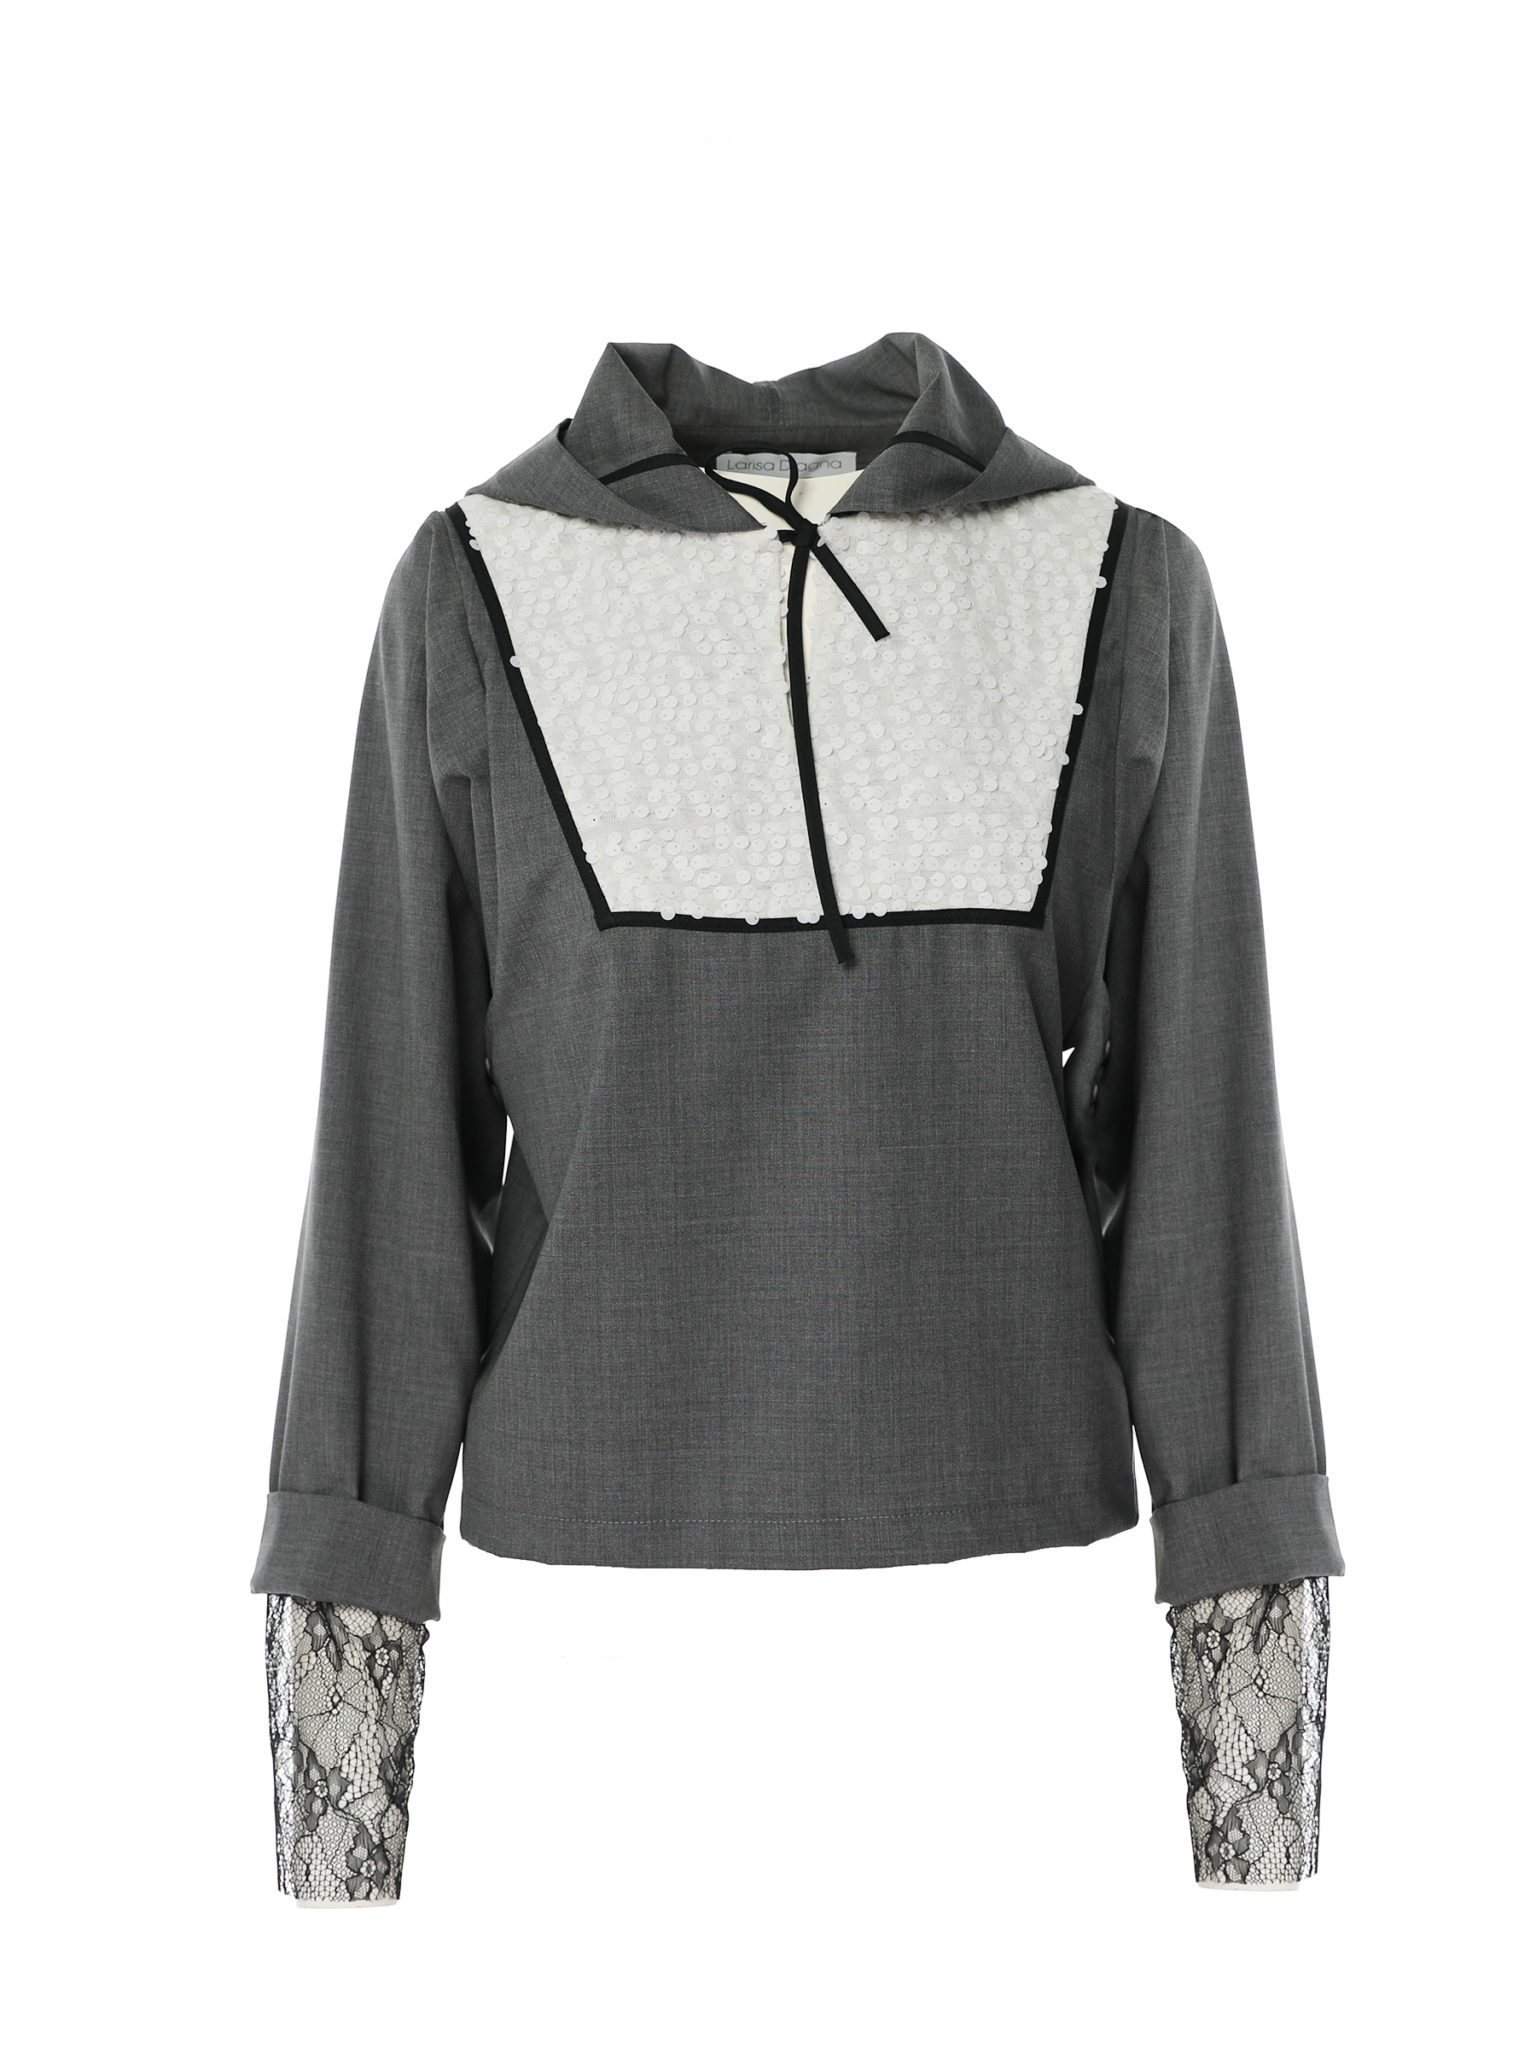 Grey hoodie blouse with sequin insertion and lace details